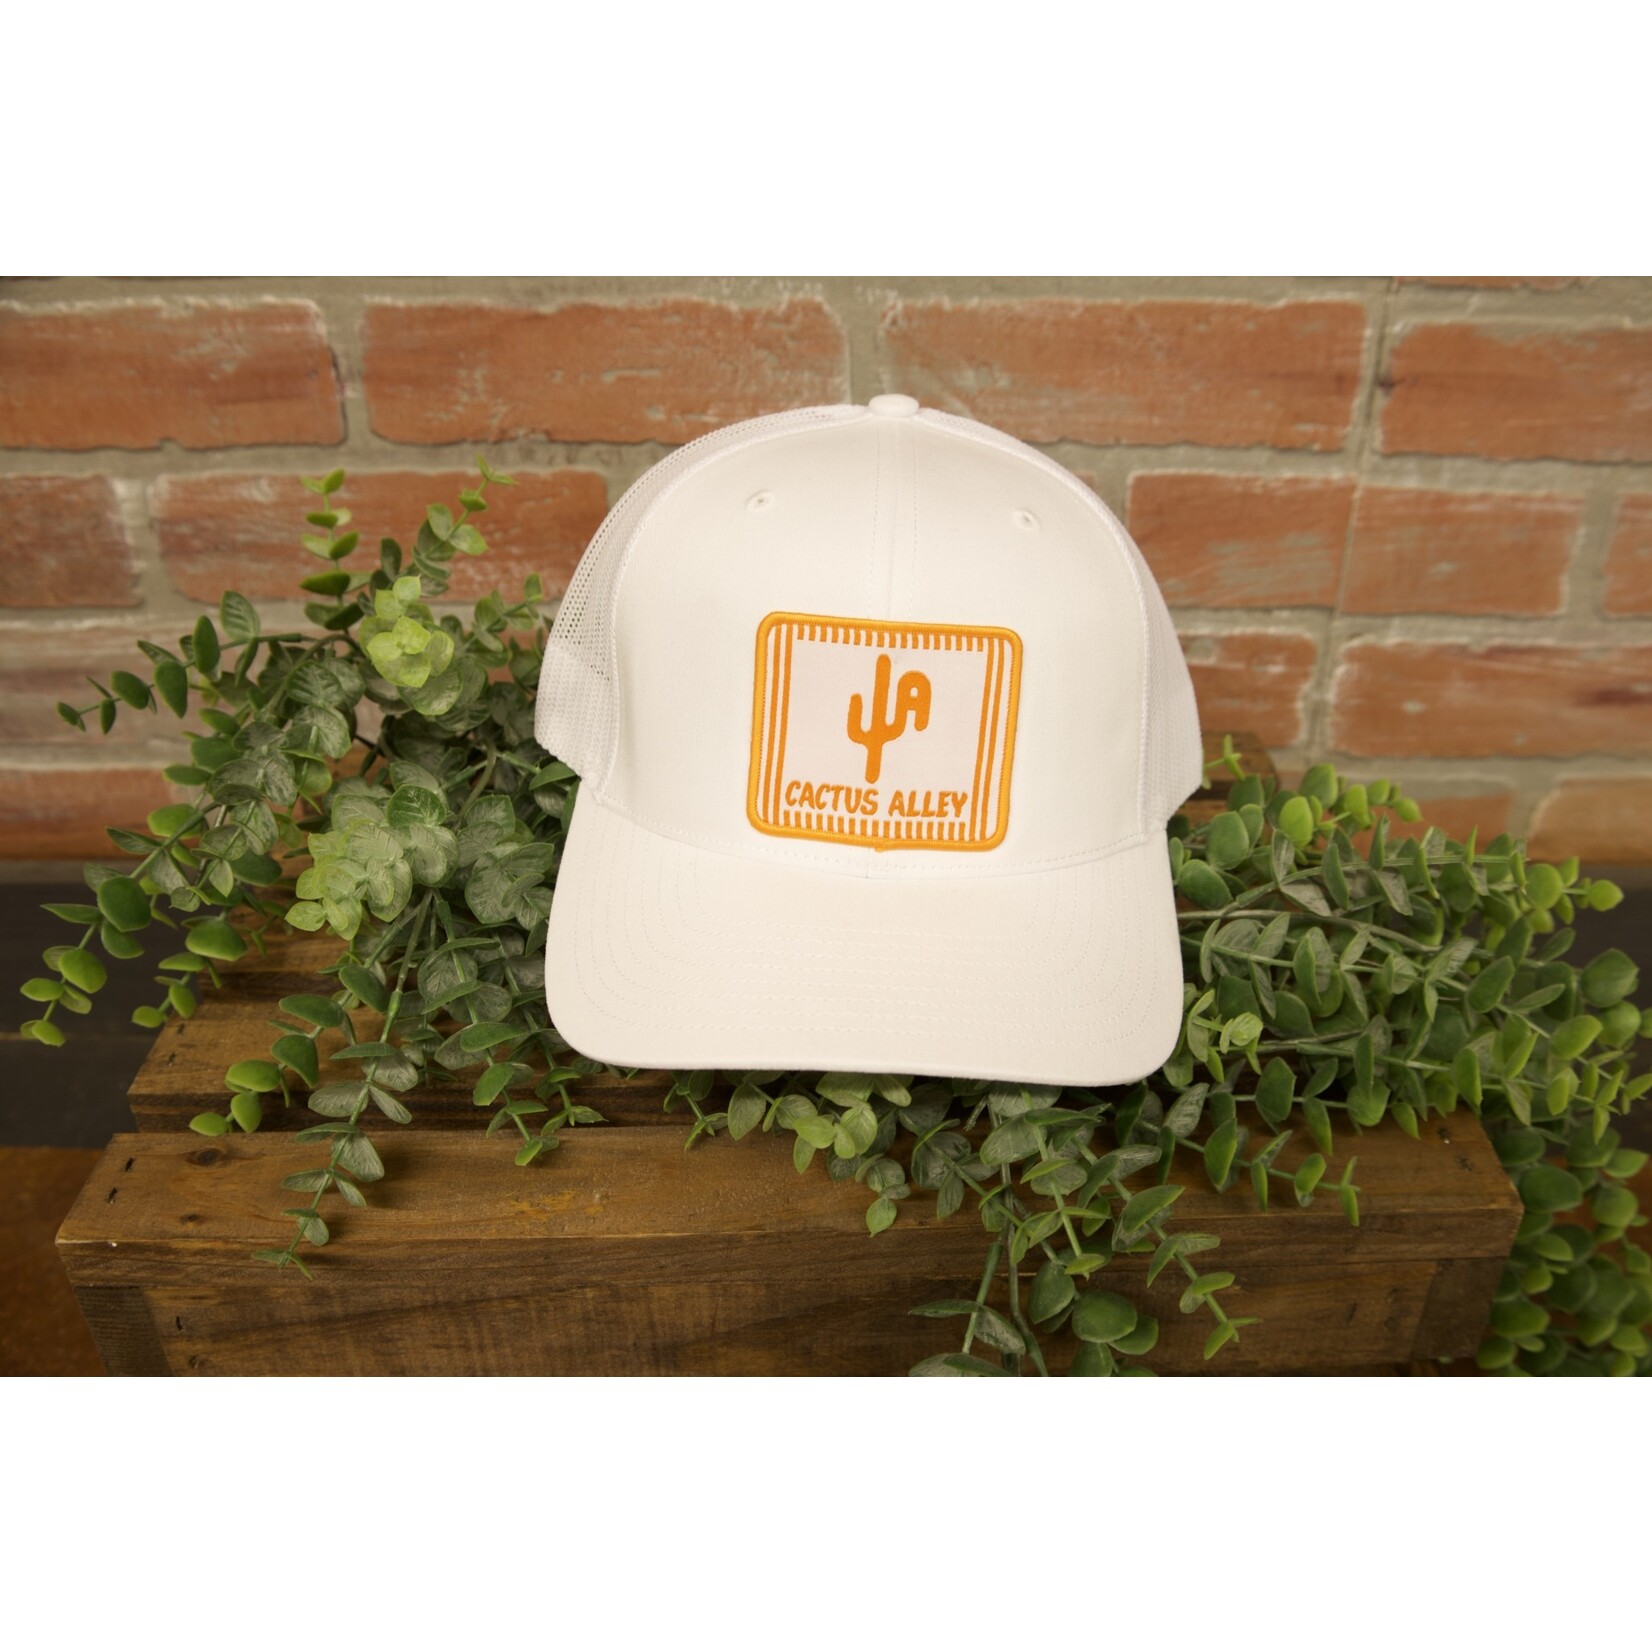 Cactus Alley Cactus Alley WhataChicken Patch Snapback Hat